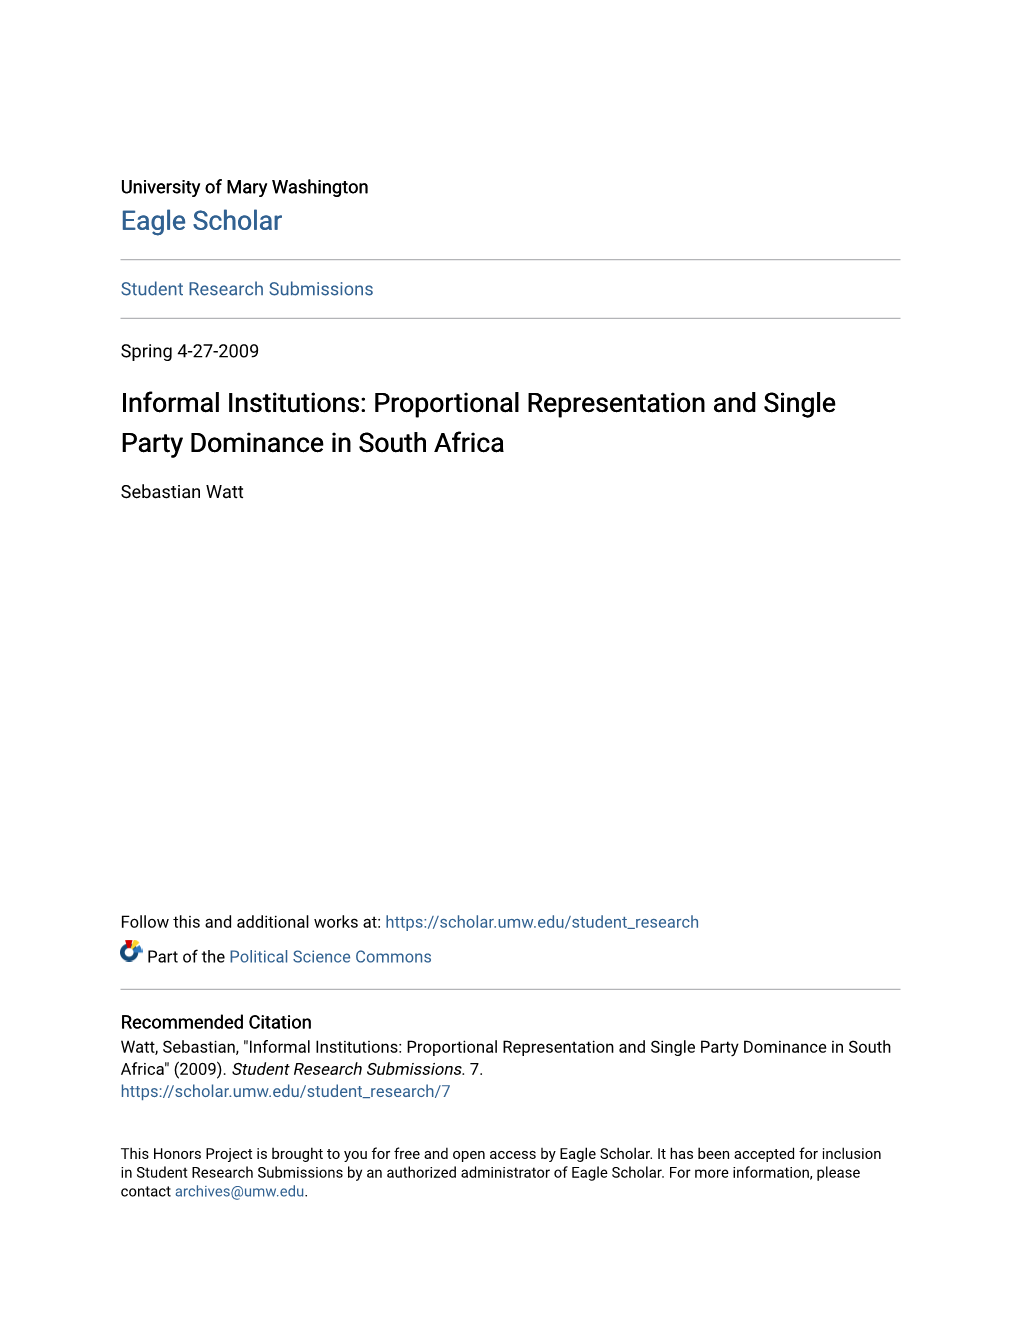 Informal Institutions: Proportional Representation and Single Party Dominance in South Africa